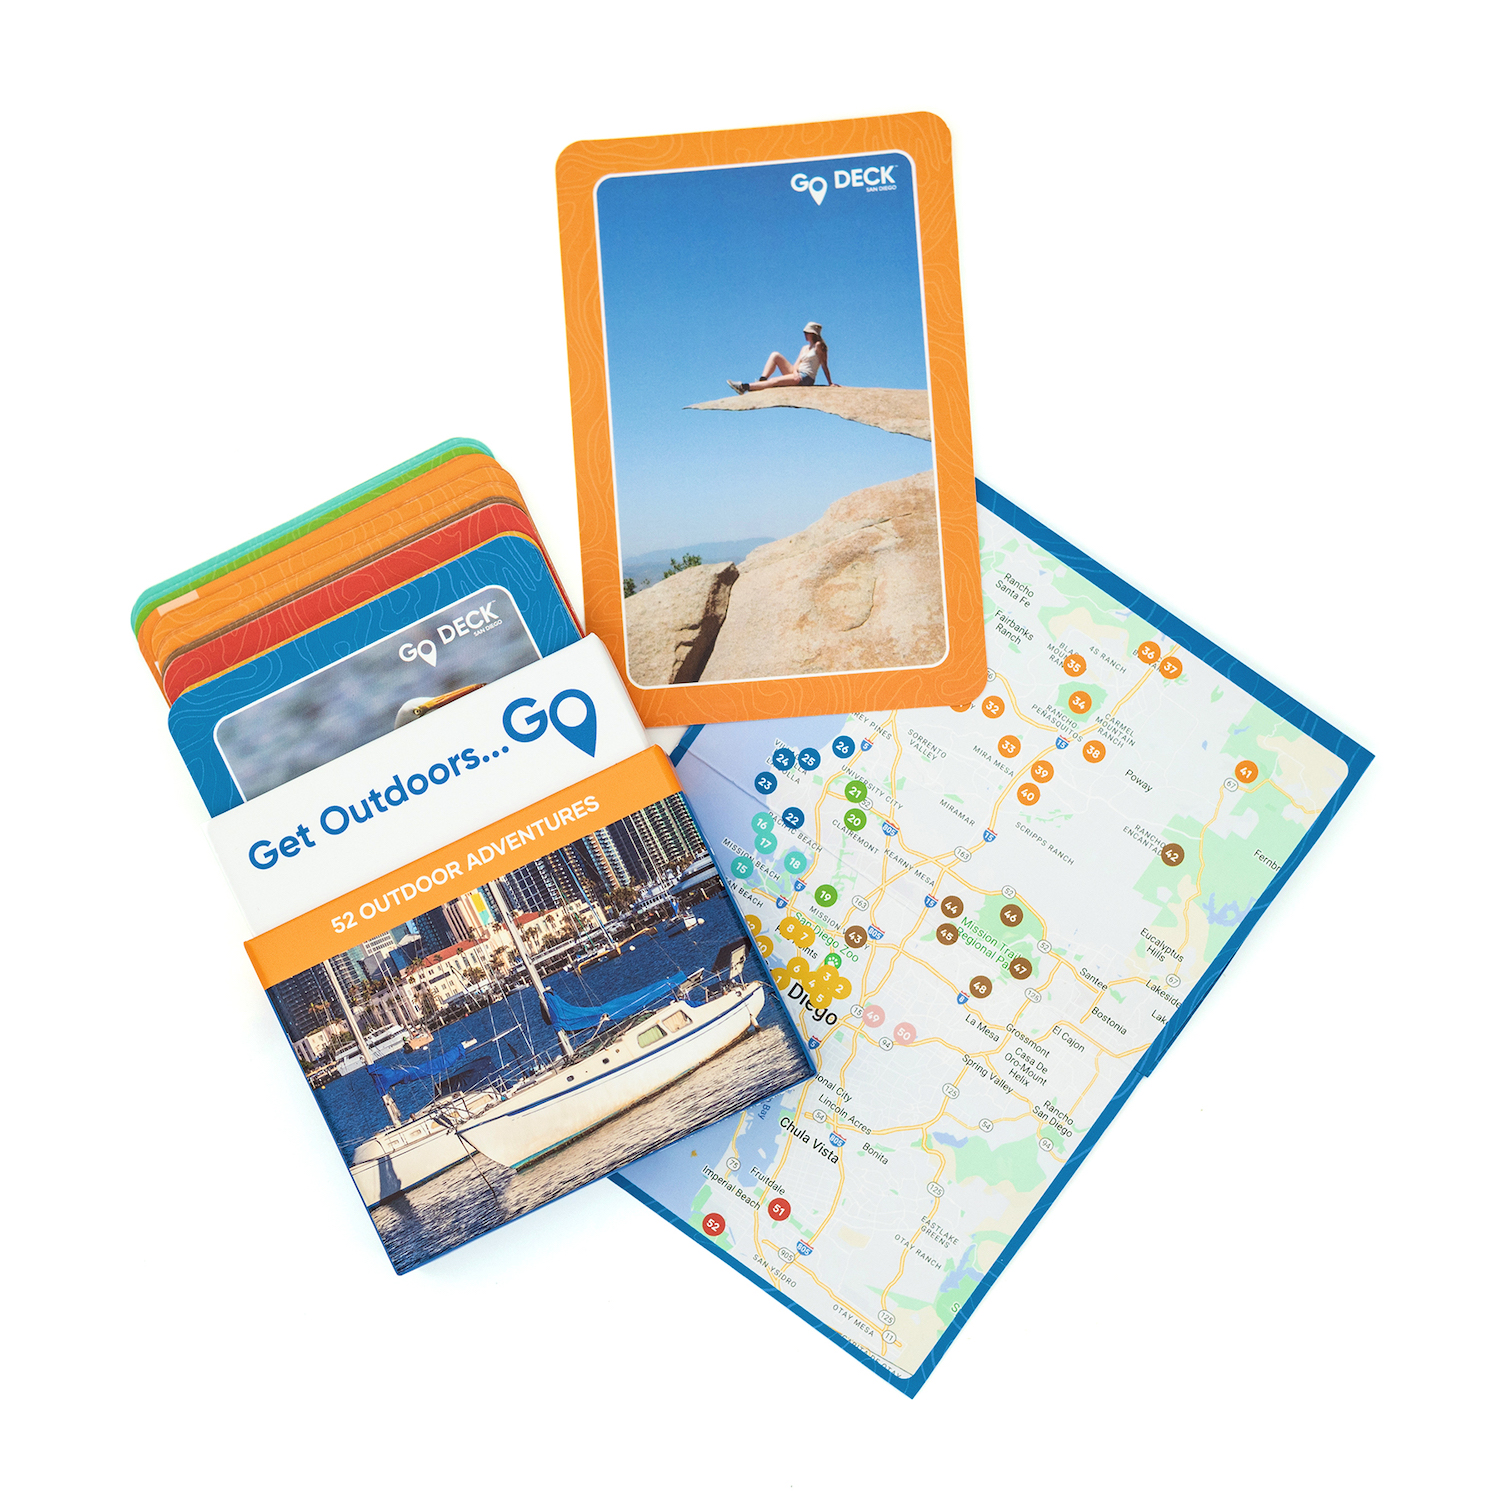 San Diego-based travel product Go Deck, a card game that features spots to hike bike, and explore